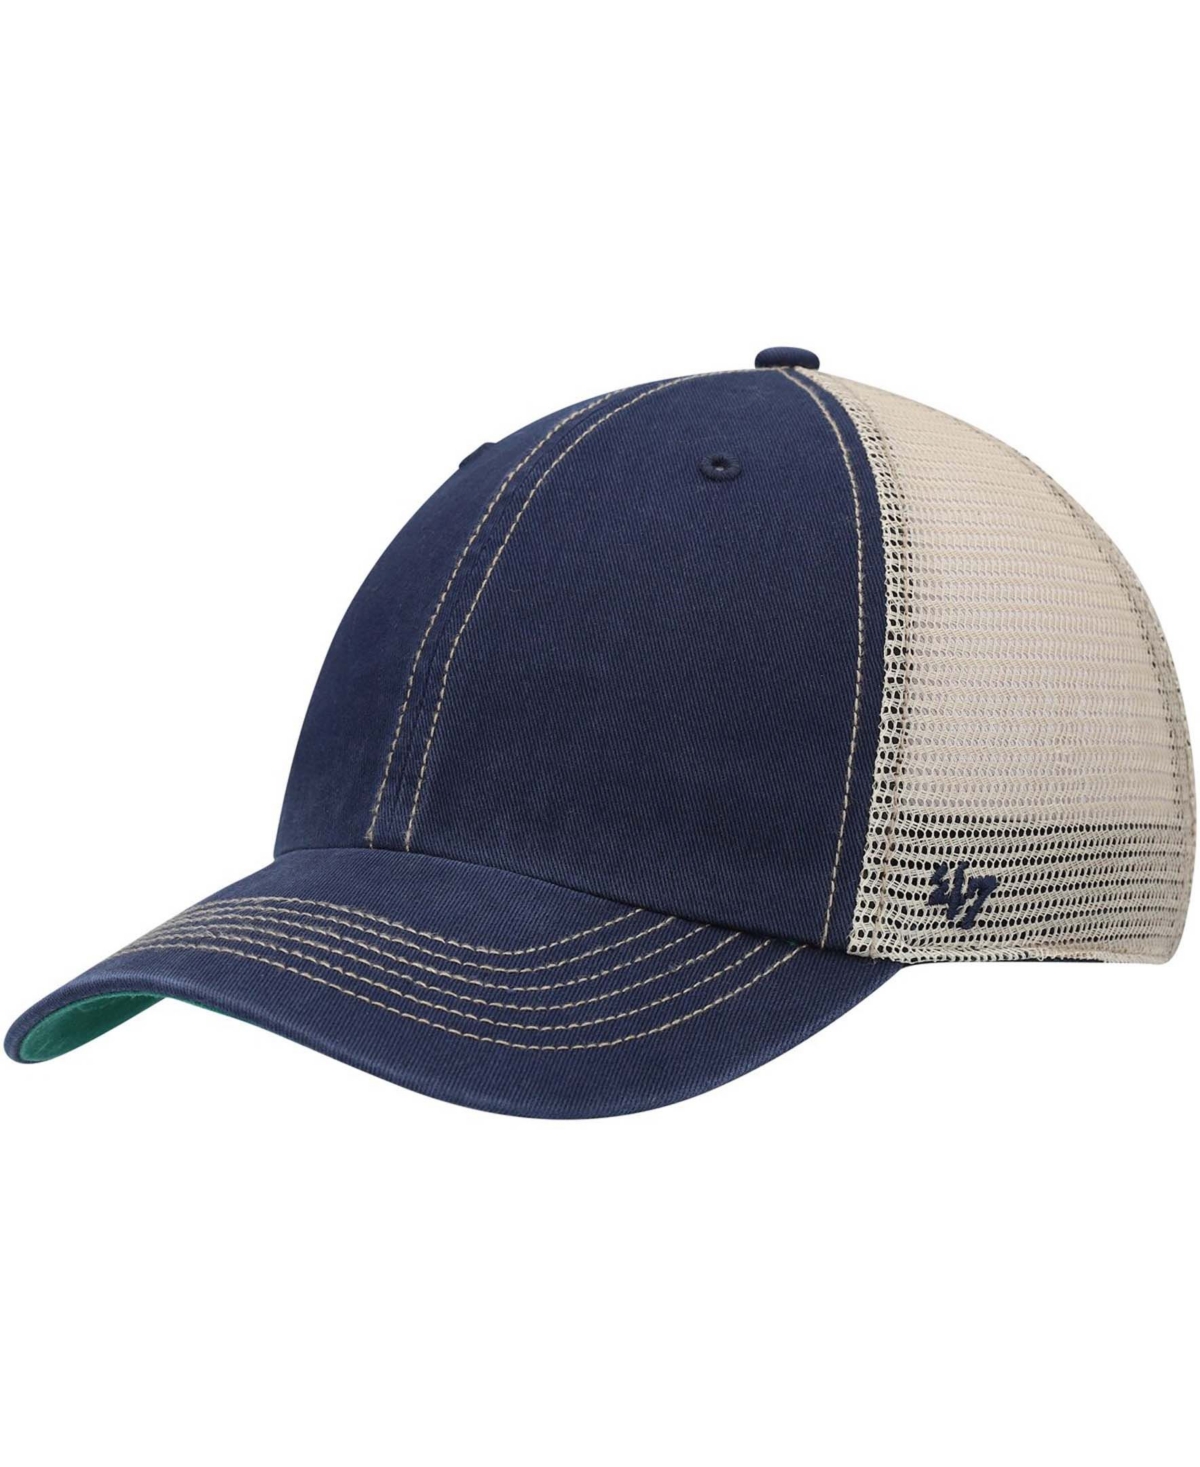 47 Brand Men's Navy, Natural Trawler Clean Up Snapback Hat In Navy,natural